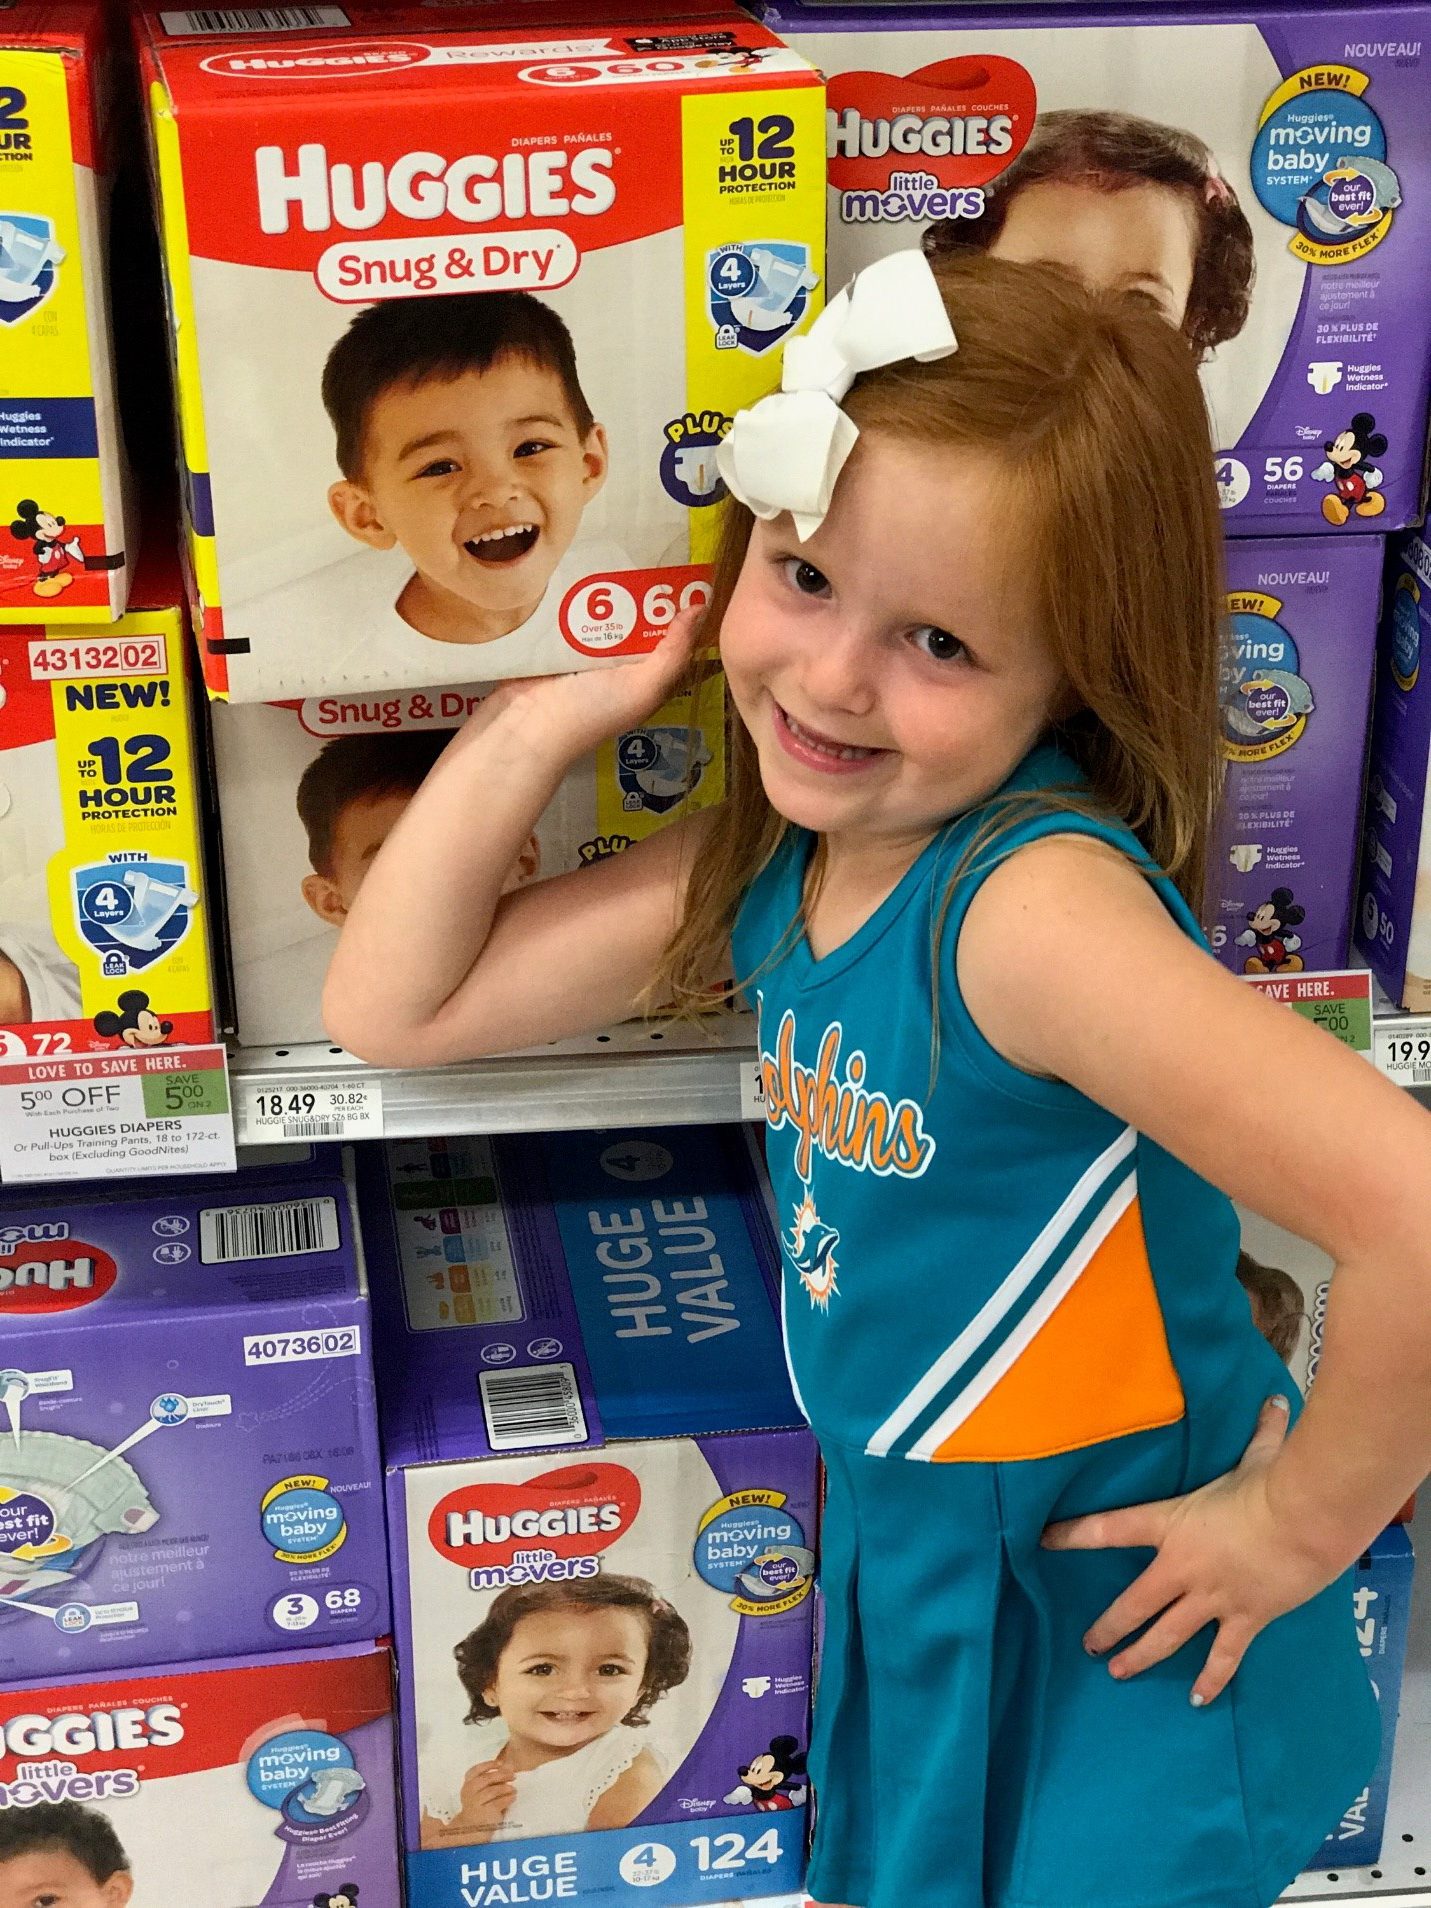 Huddle Up with Huggies and Miami Dolphins • Happy Family Blog